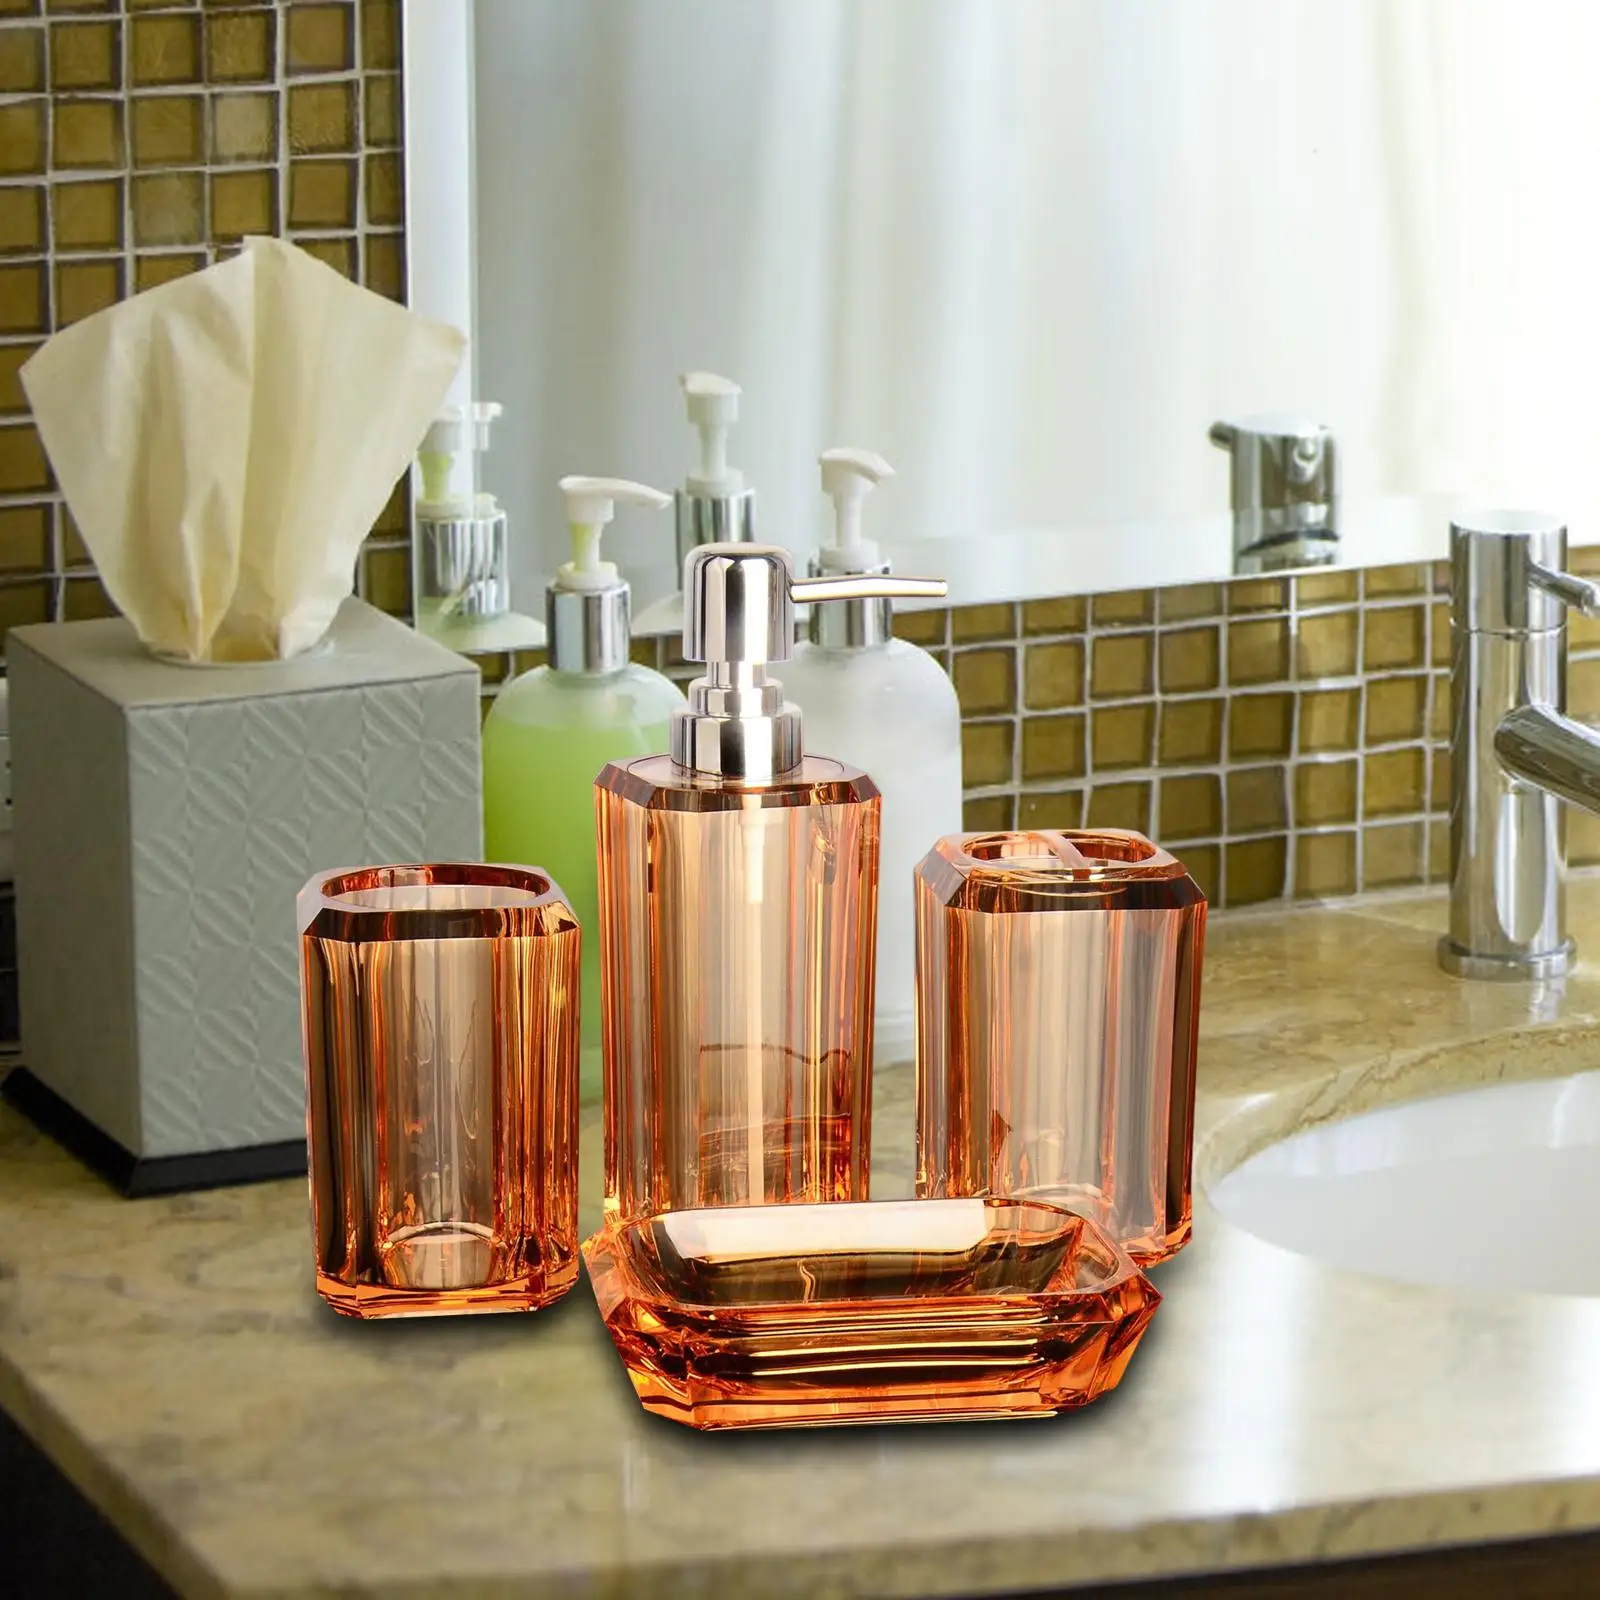 4Pcs Bathroom Accessories Set Lotion Bottle Toothbrush Holder for Home Decor